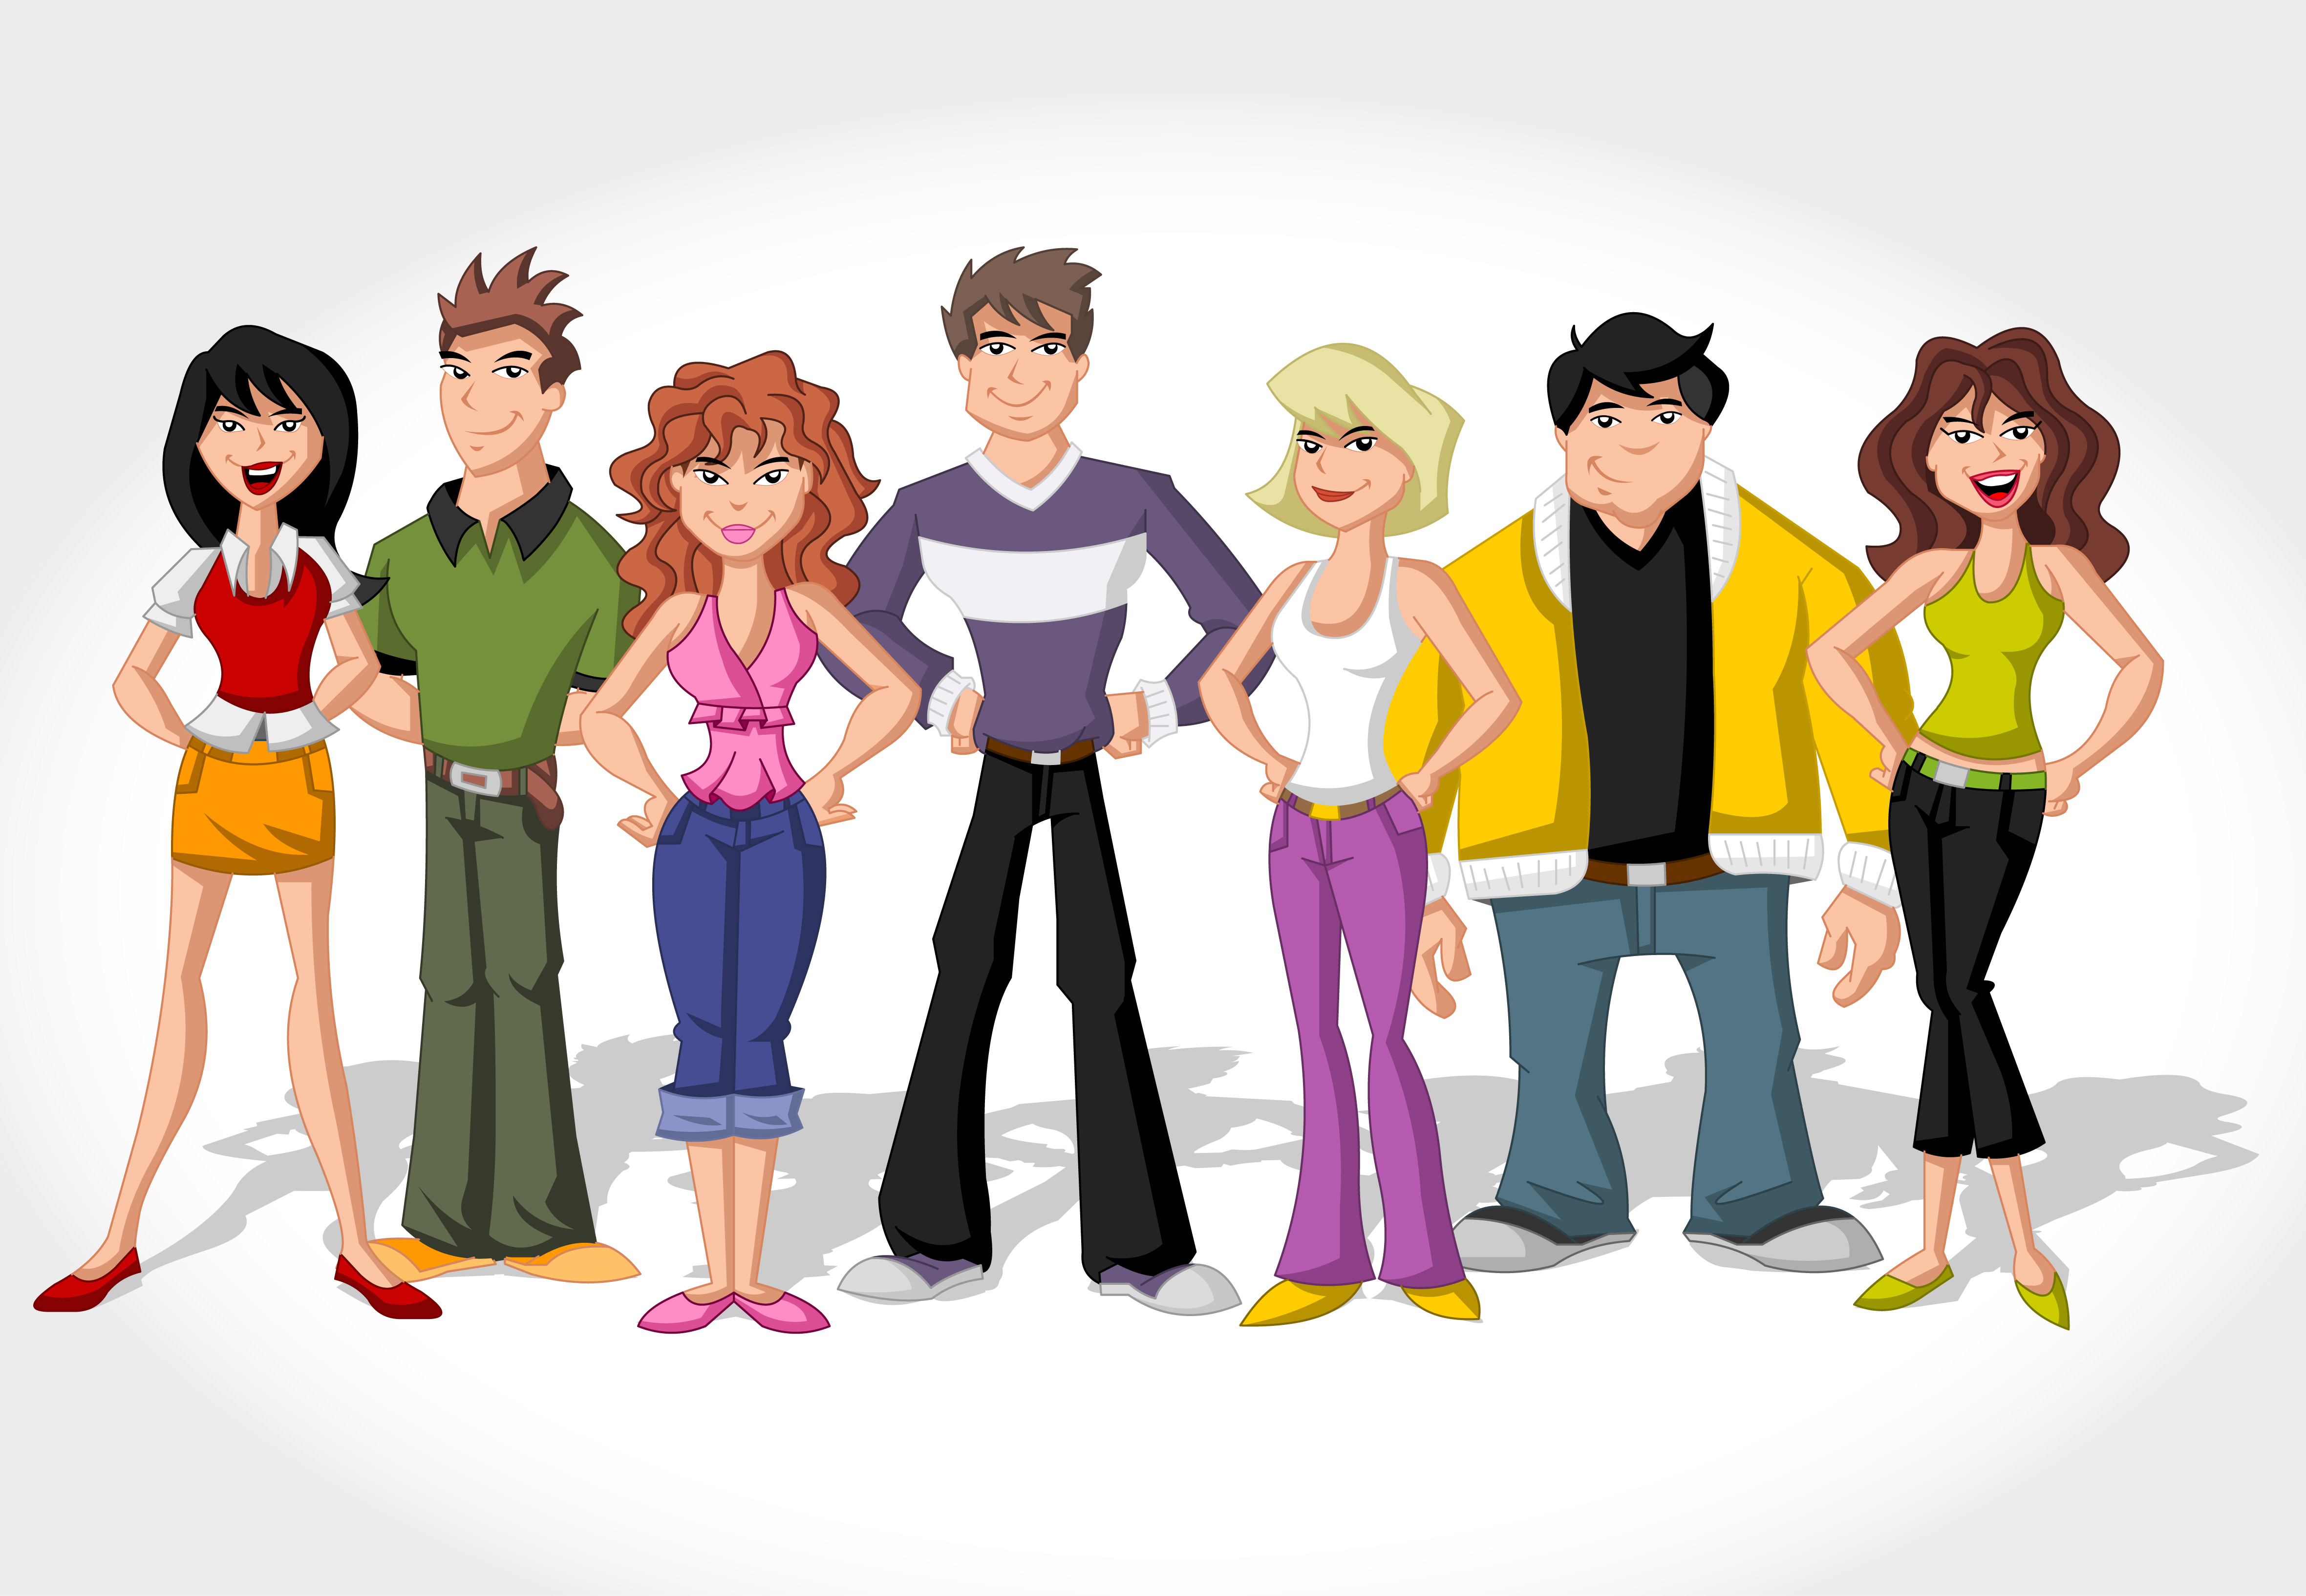 Free Download Images Cartoon Characters - ClipArt Best